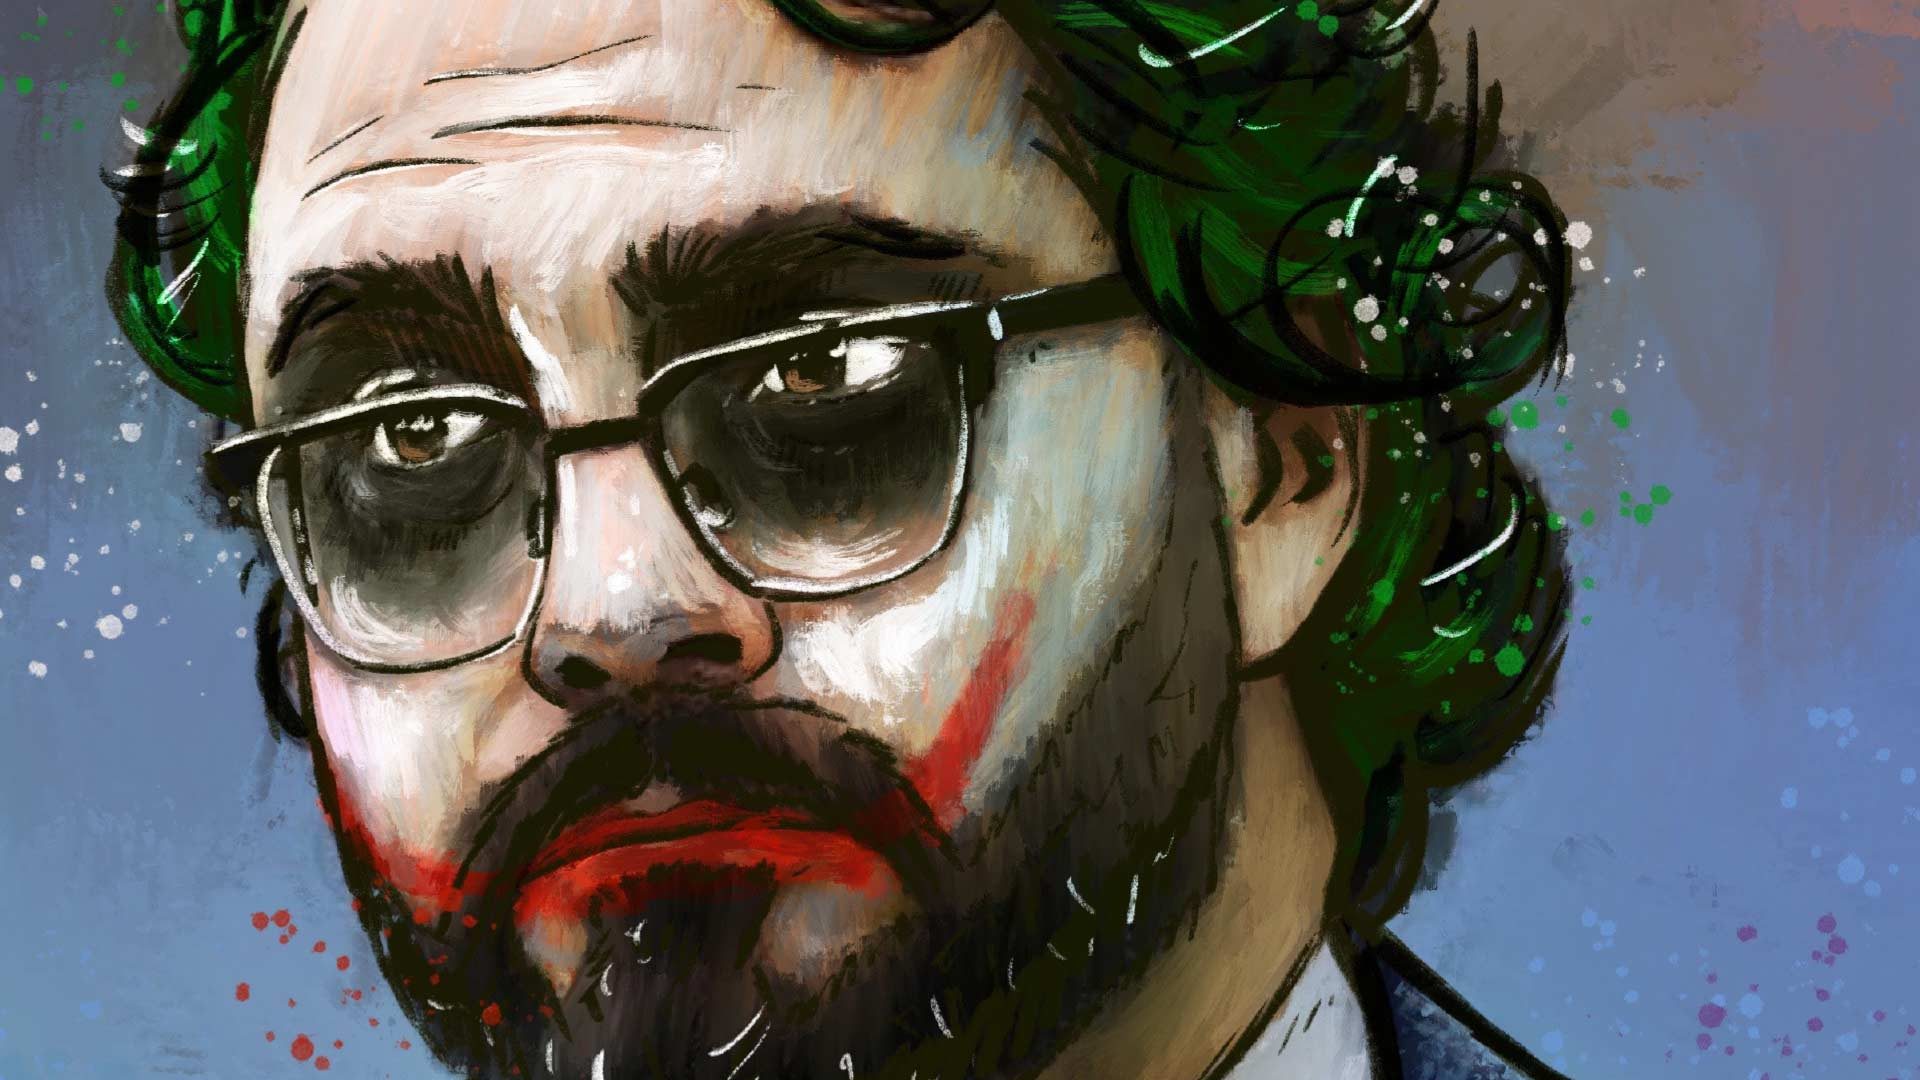 An illustration of Victor Orta as a sad clown. It's a metaphor.